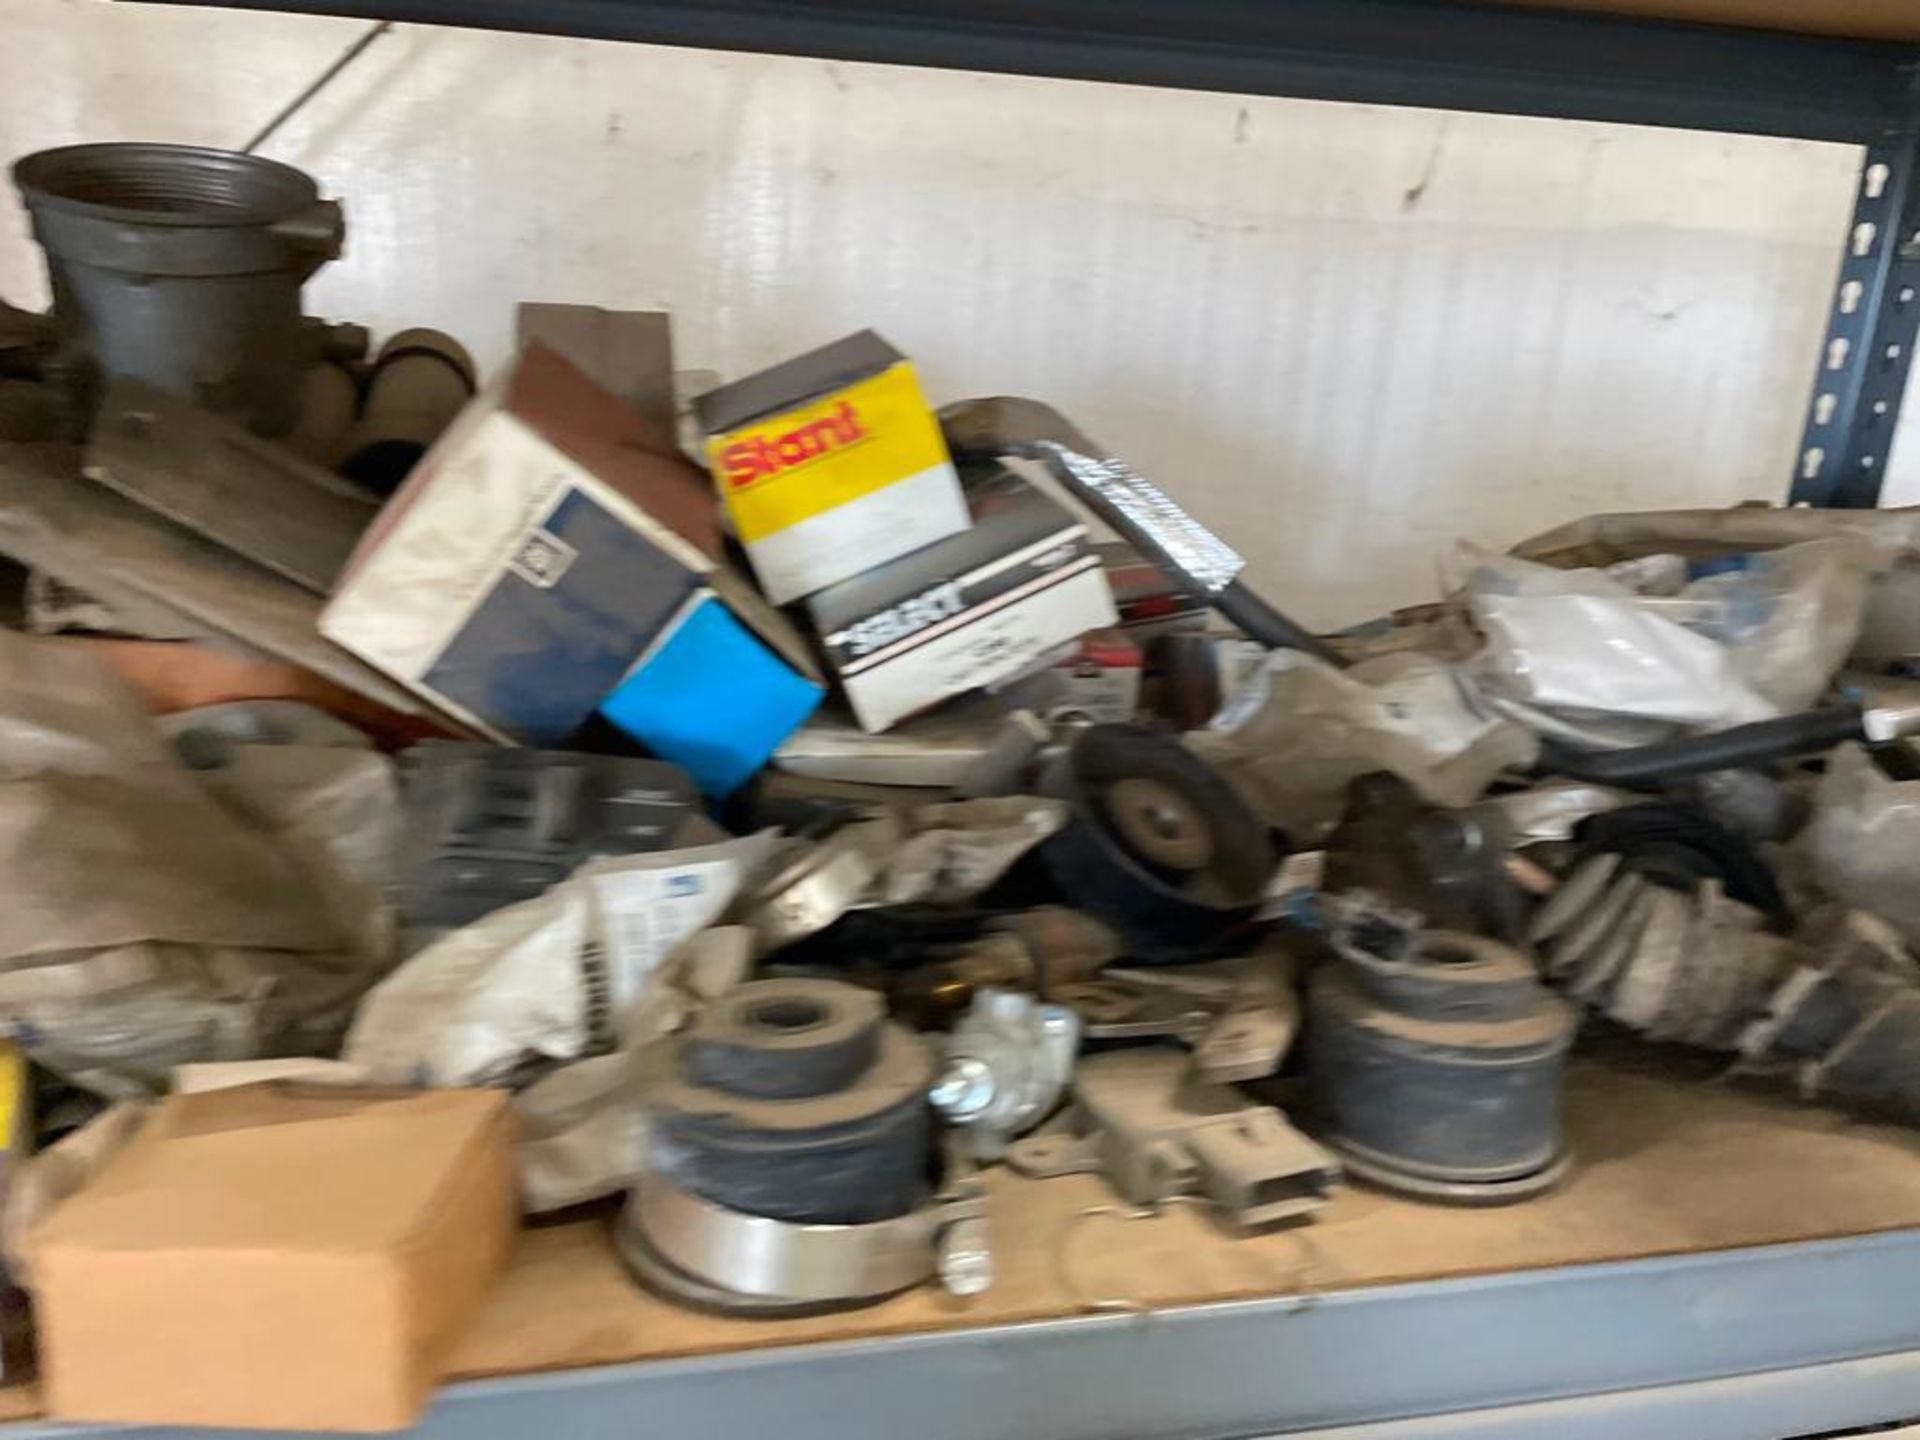 Miscellaneous Parts on Shelving Unit, Tail Lights, Connectors, Light Box Triple, Etc. Located in Ha - Image 13 of 13